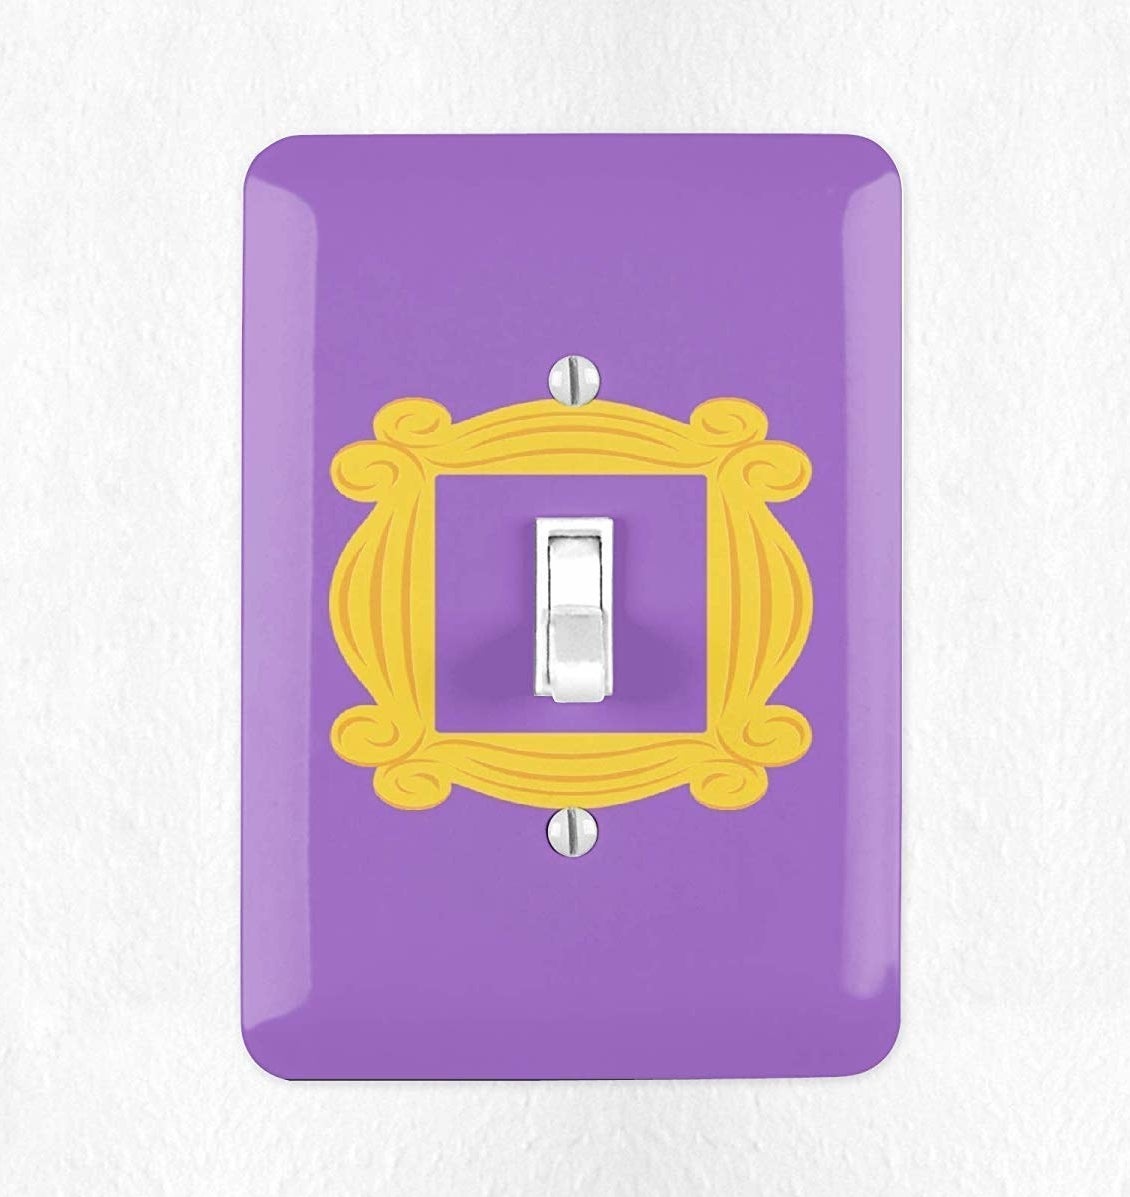 The purple and yellow light switch cover